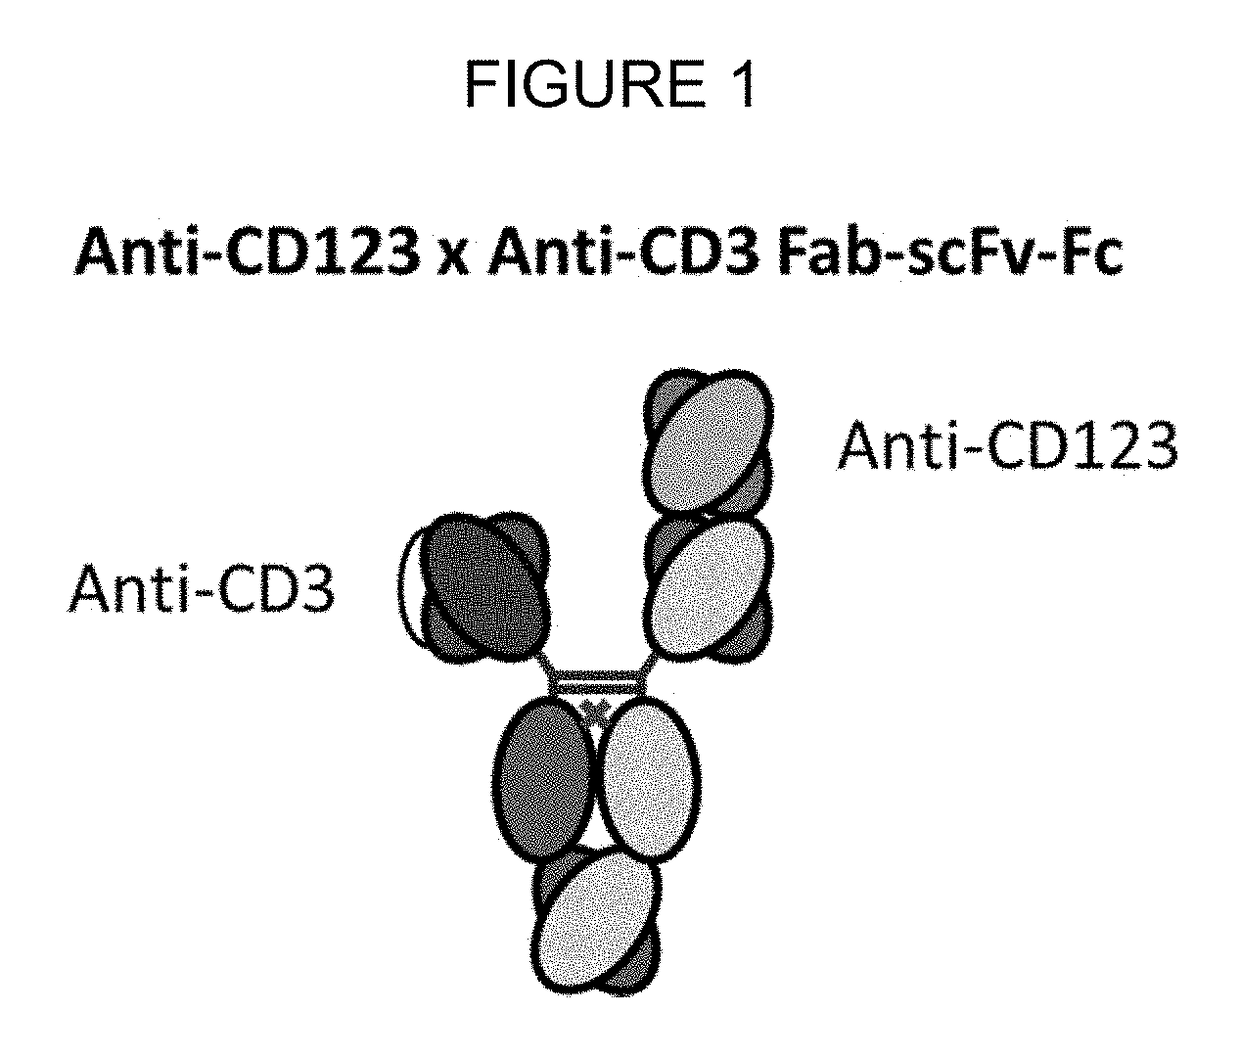 Bispecific antibodies that bind cd123 and cd3